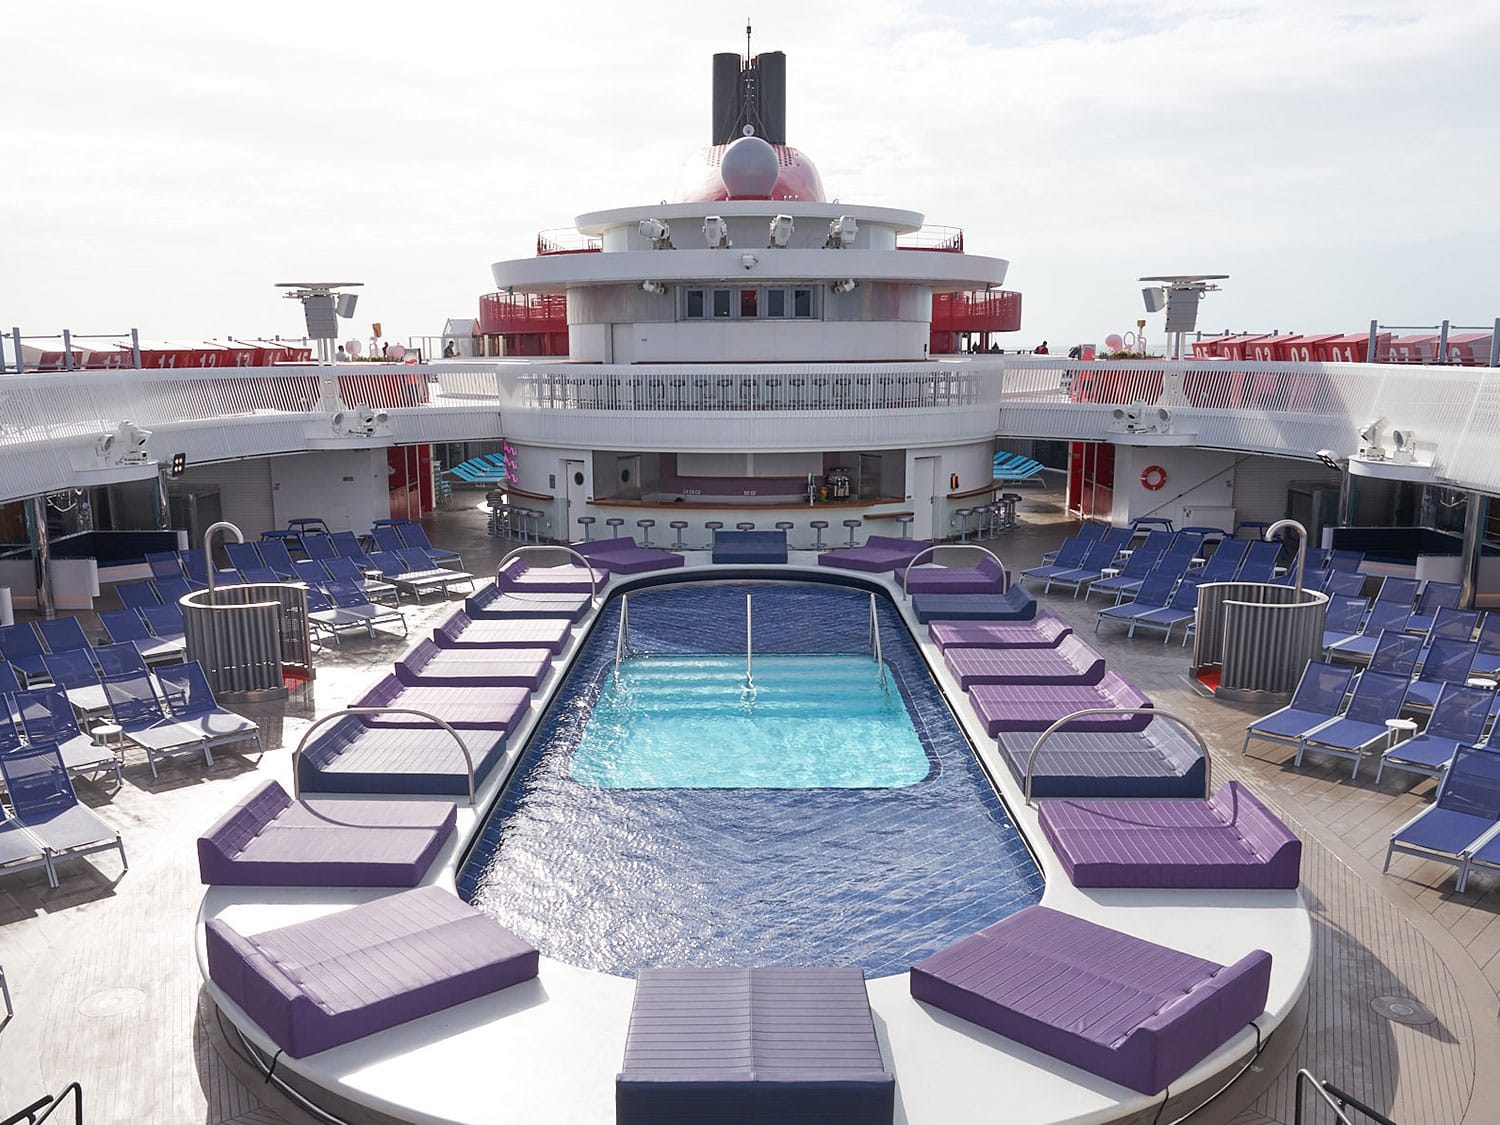 A view of the empty pool area aboard the Virgin Voyages Scarlet Lady cruise ship.